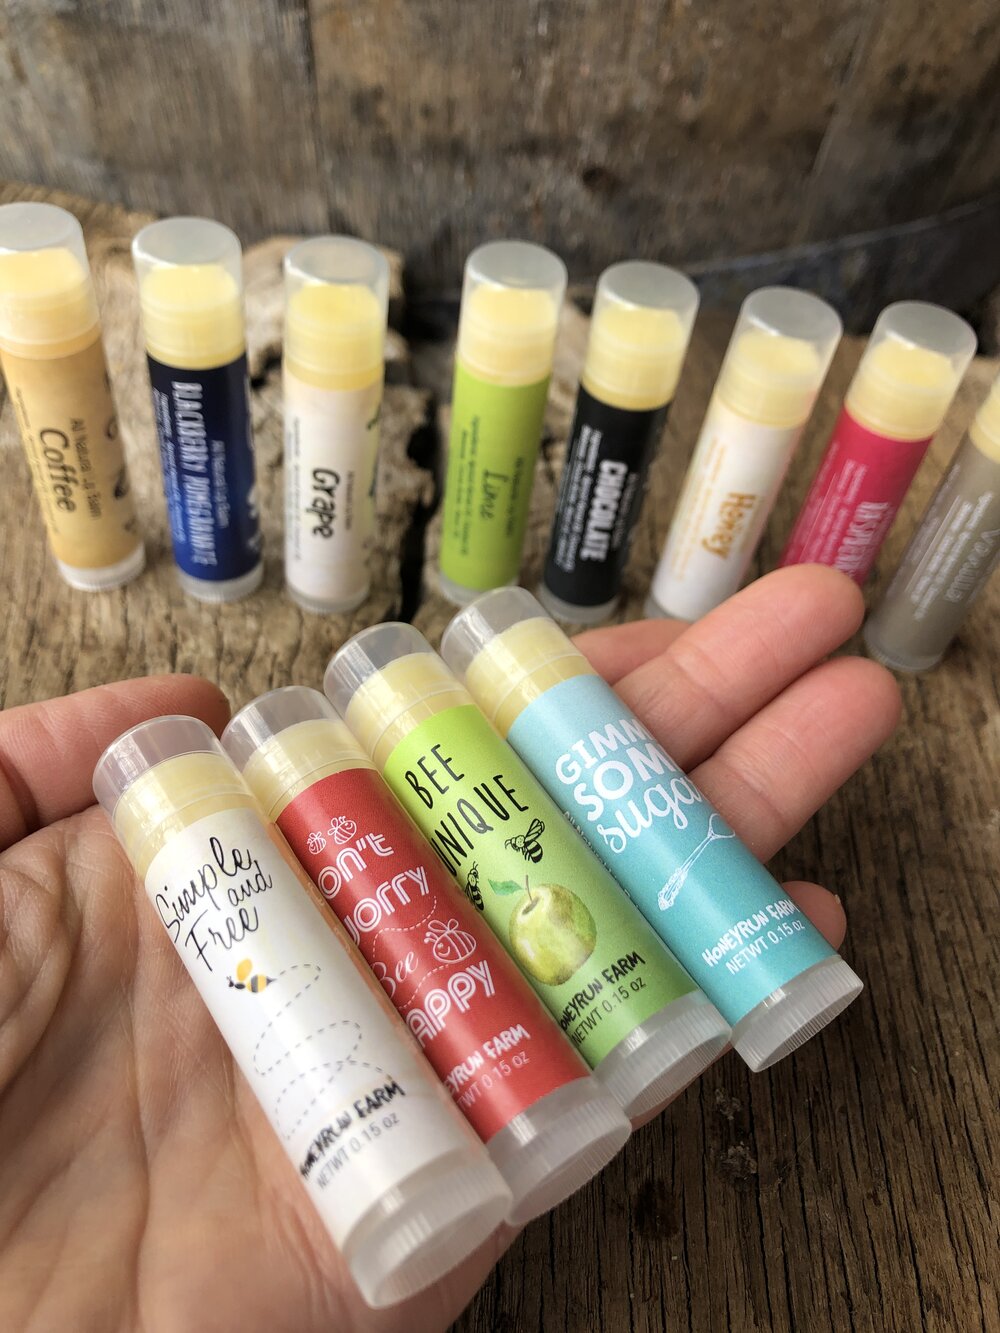 Pineapple/Coconut All Natural Beeswax Lip Balm; 24 Count Dispenser | Only 45.99 When You Order Now at Our Georgia Honey Farm